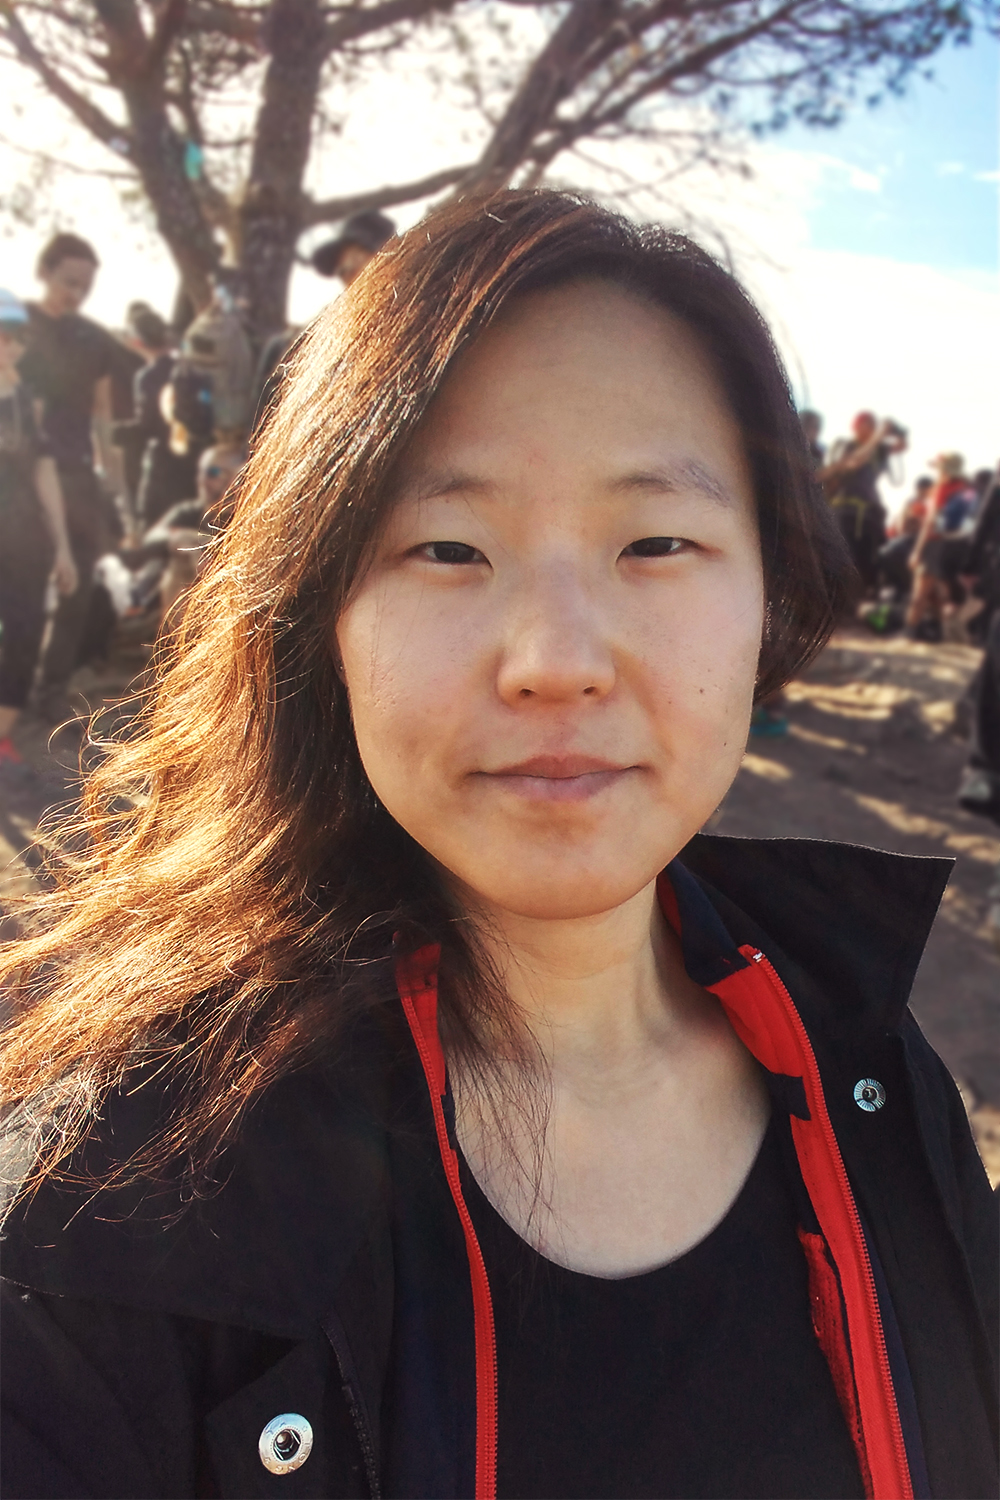 An image, taken from the chest up, of an adult Korean woman in casual clothing, with a slight smile, and with long untidy black hair swept to her right shoulder. She is standing outdoors in daylight, and warm sunshine lights up the right side of her face, mostly her hair, which reflects yellow and brown. In the blurred background are a number of people further away standing around, indicating that she was part of a group hike activity.